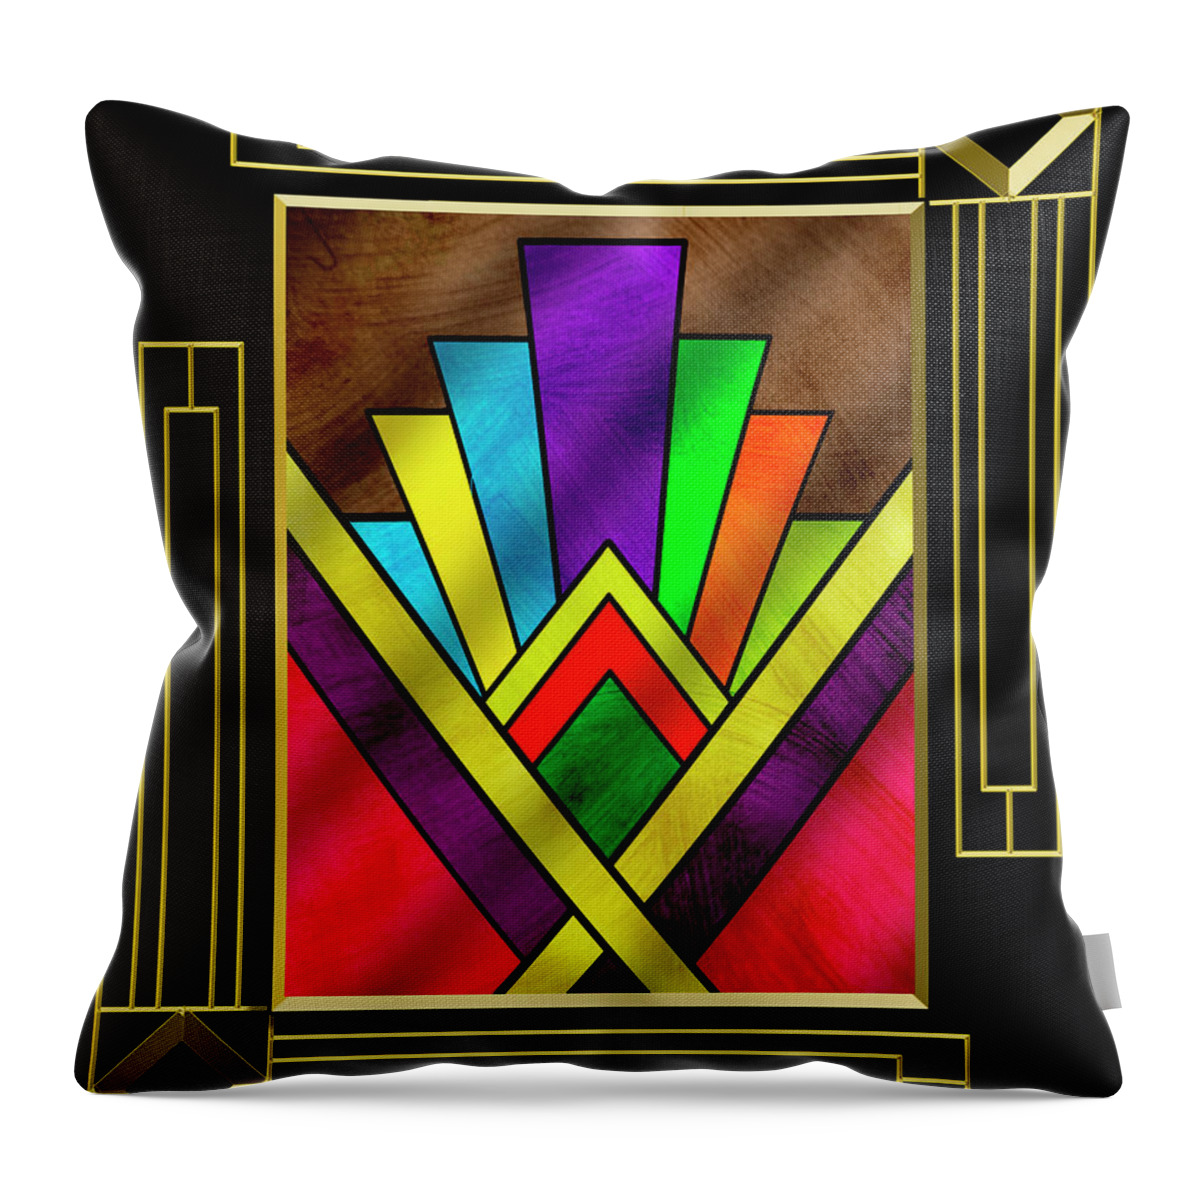 Staley Throw Pillow featuring the digital art Art Deco 7 B - Frame 5 by Chuck Staley